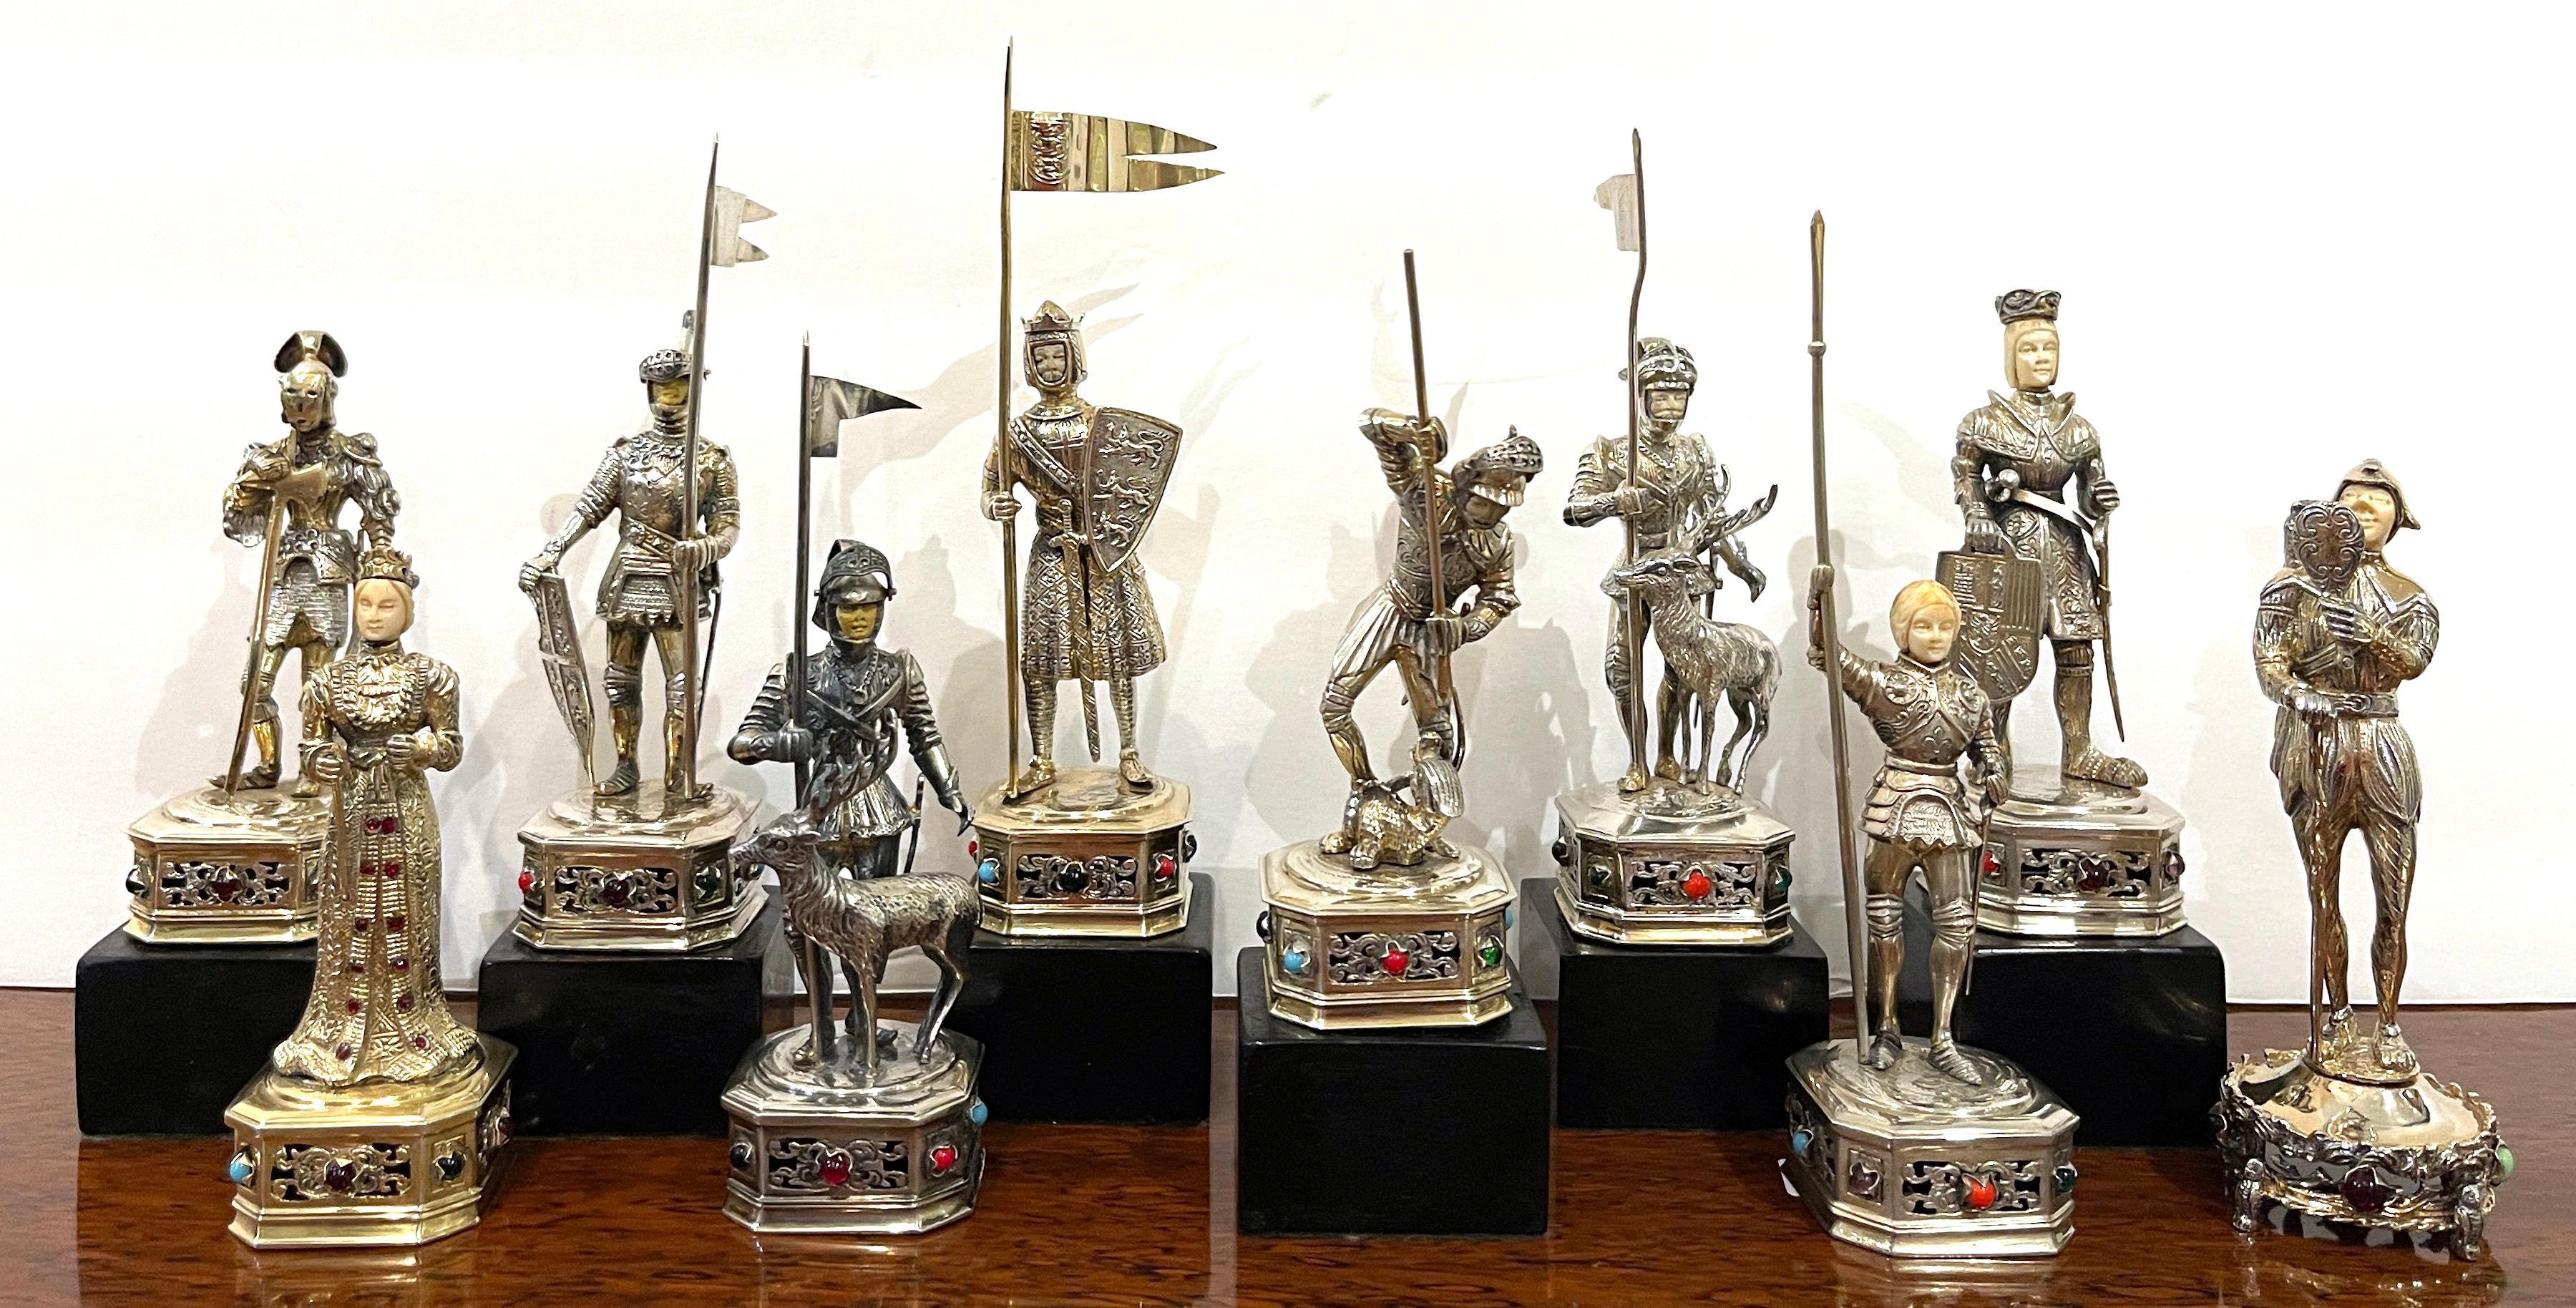 A collection of ten sterling silver & semi-precious stone medieval figures 
Germany, 20th Century, Post WWII, 1950s

A stunning assembled collection of cast, meticulously modeled figures of the Medieval / Renaissance period. 

Each one with a